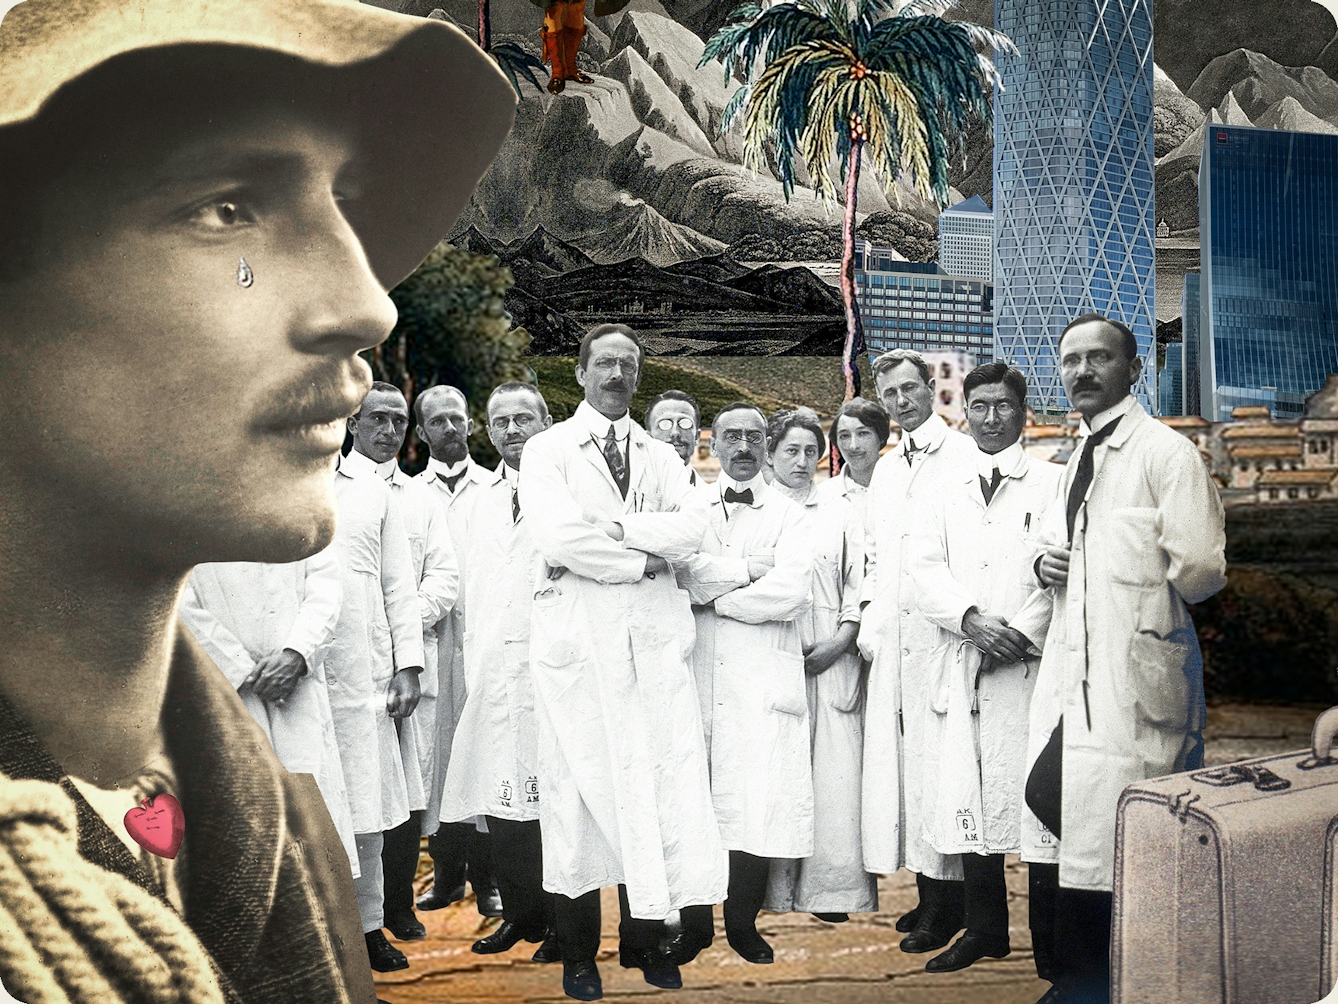 Artwork using collage. The collaged elements are made up archive material which includes vintage photographs, etchings, painted illustrations, lithographic prints and line drawings. This artwork depicts the head of a man on the far left who looks a little like an explorer with a rope over his shoulder and a hat on his head. A tear falls from his eye. Next to him stands a group of doctors all wearing white knee length lab coats. Next to them is a suitcase. The man wears a small red heart around his neck. In the distance plan trees, mountains and tall glass and metal skyscrapers can be seen.